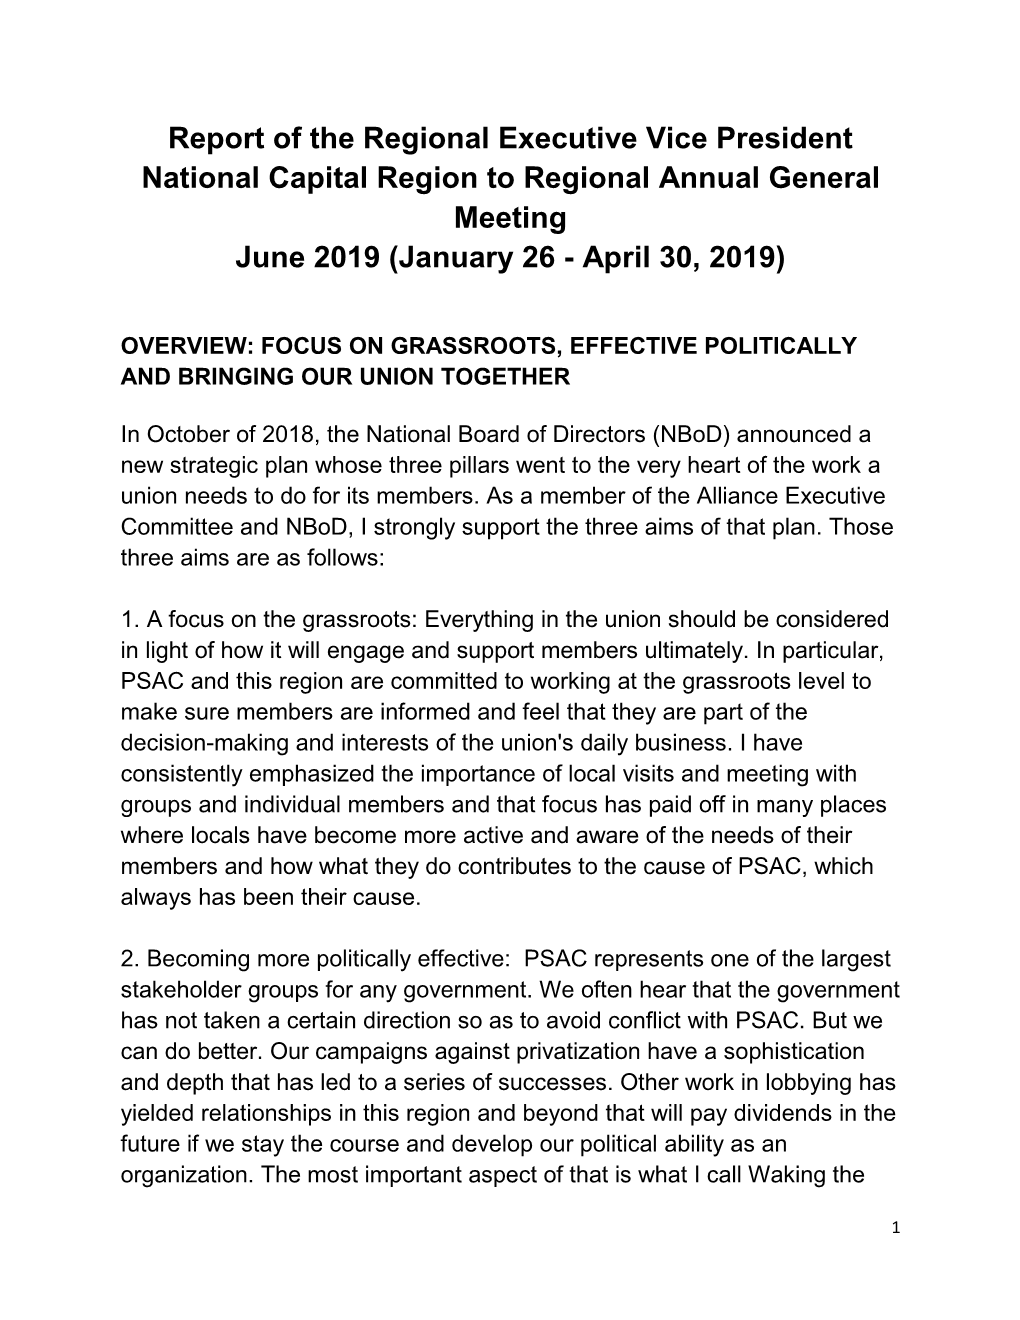 Report of the Regional Executive Vice President National Capital Region to Regional Annual General Meeting June 2019 (January 26 - April 30, 2019)